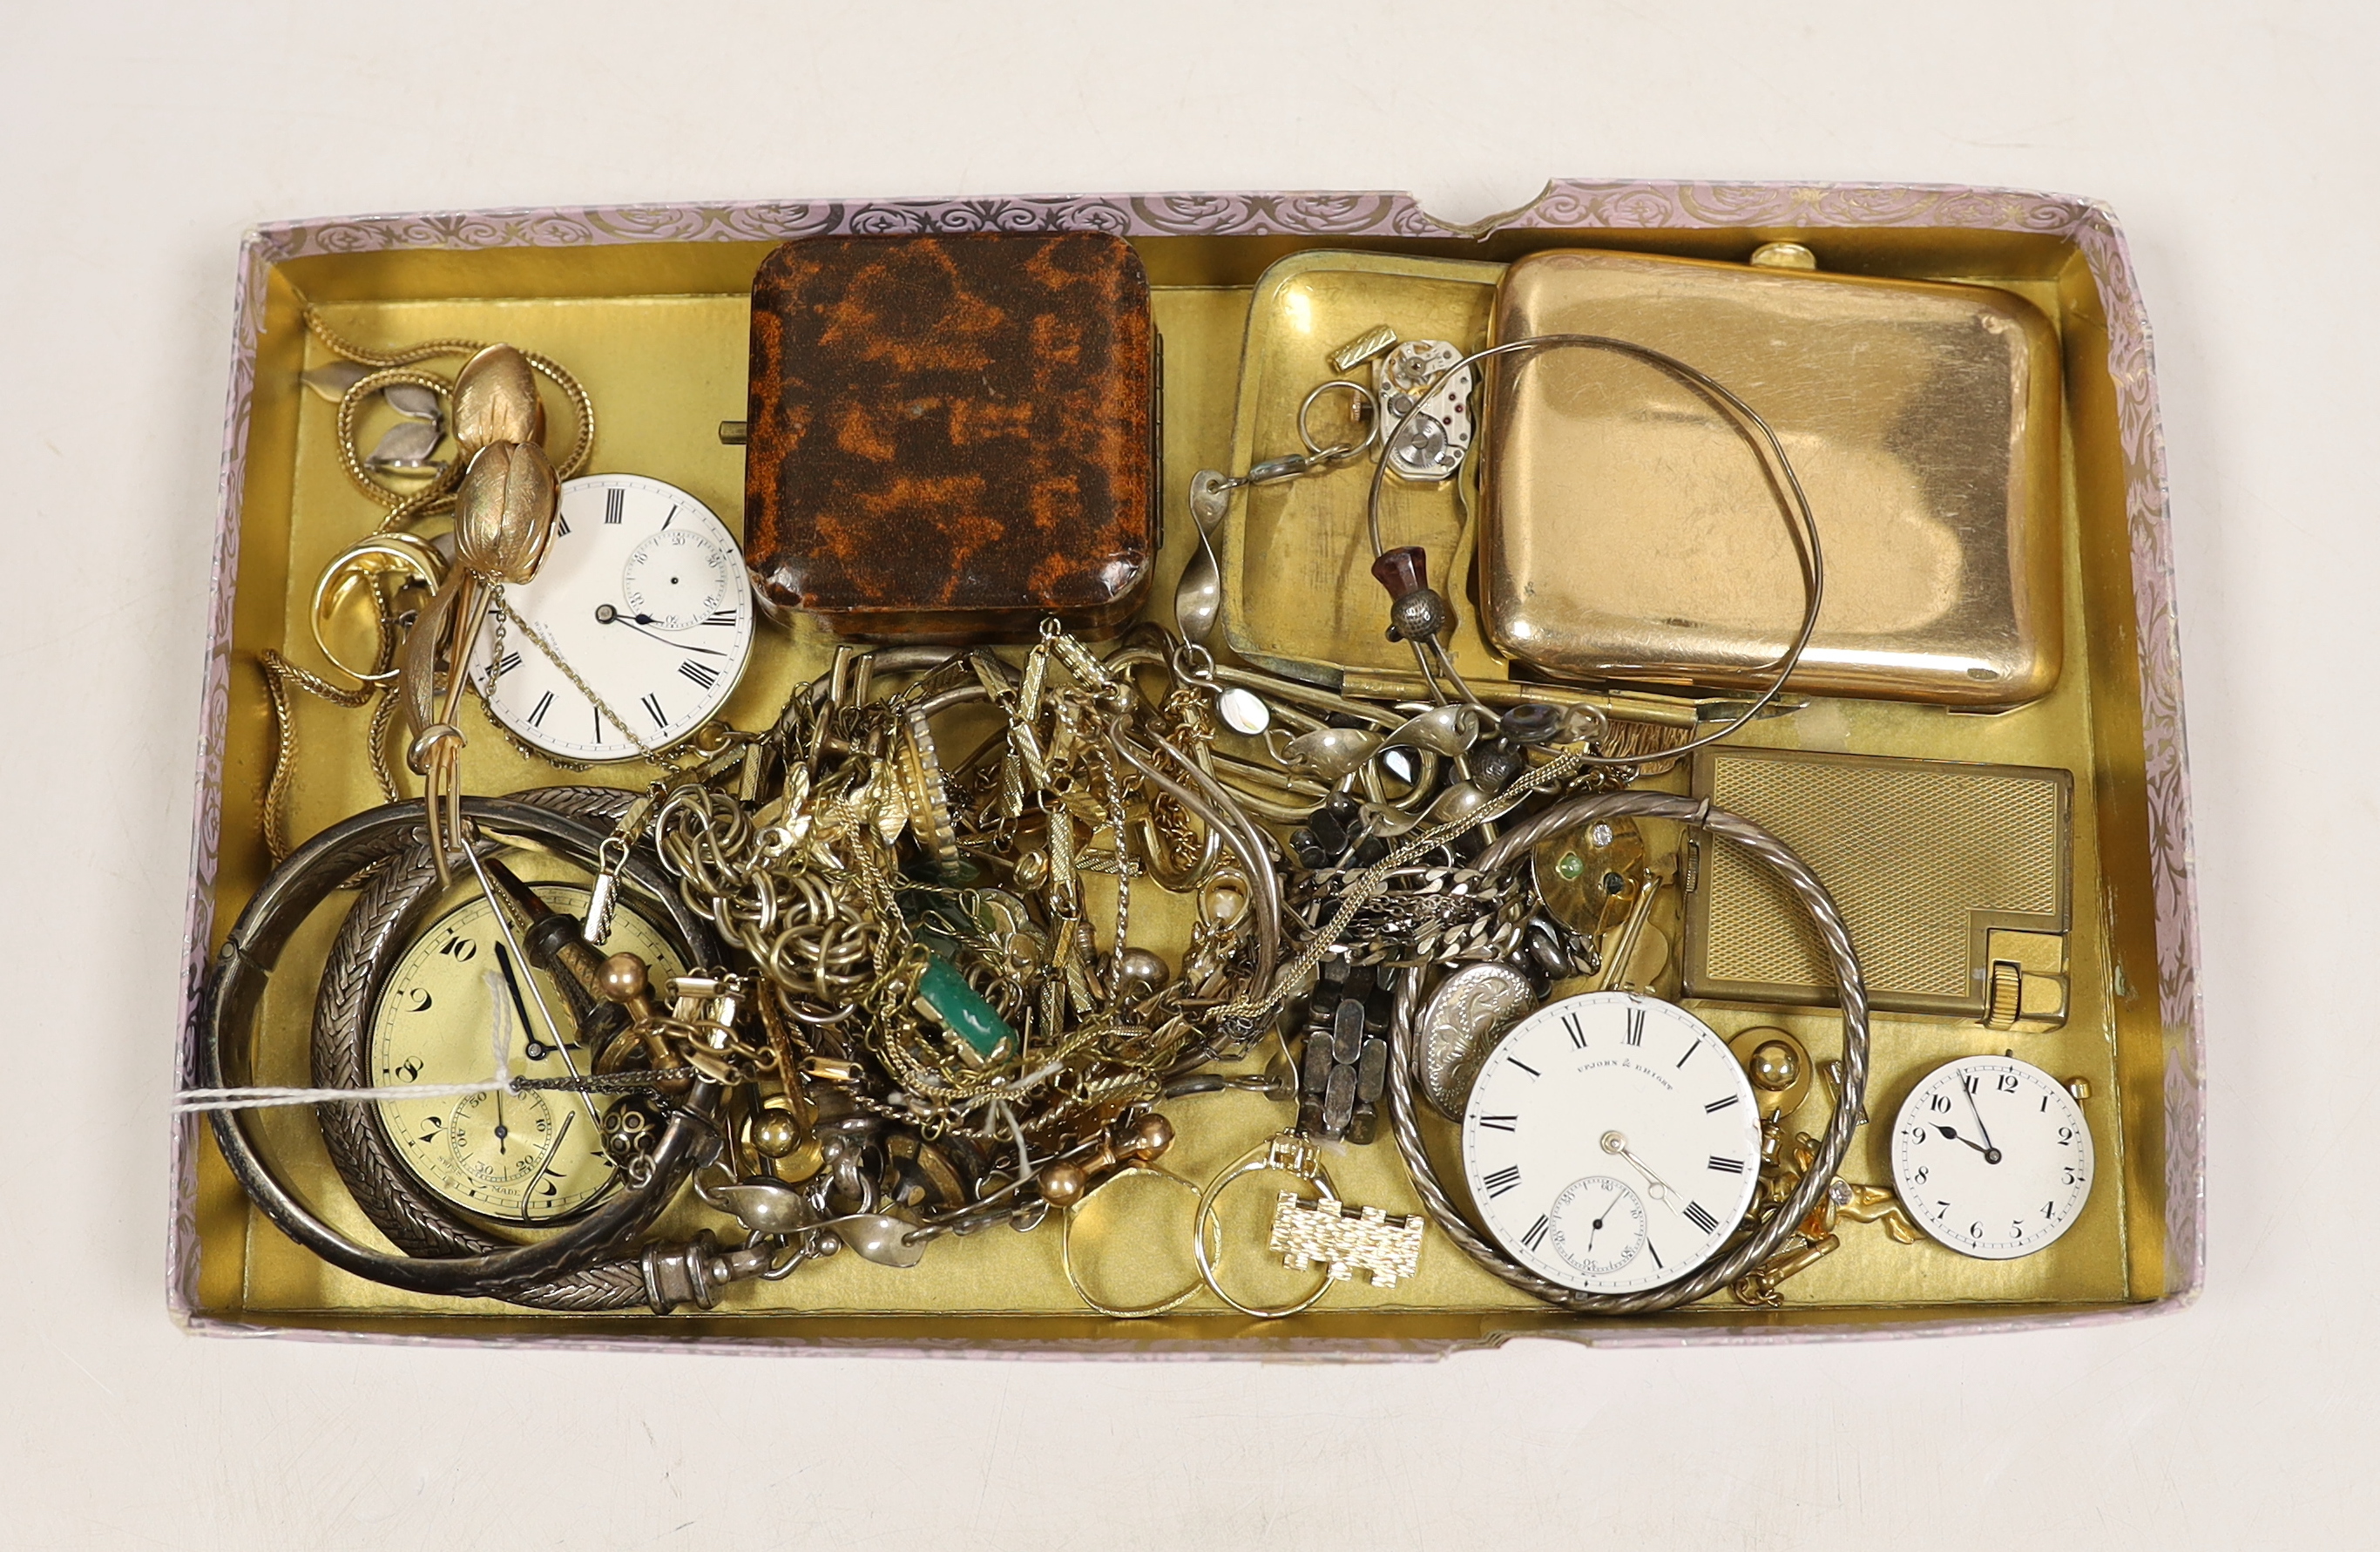 A quantity of assorted mainly costume jewellery and other items including a silver hinged bangle, pair of 925 drop earrings, 925 bracelet, pocket watch movements, etc.